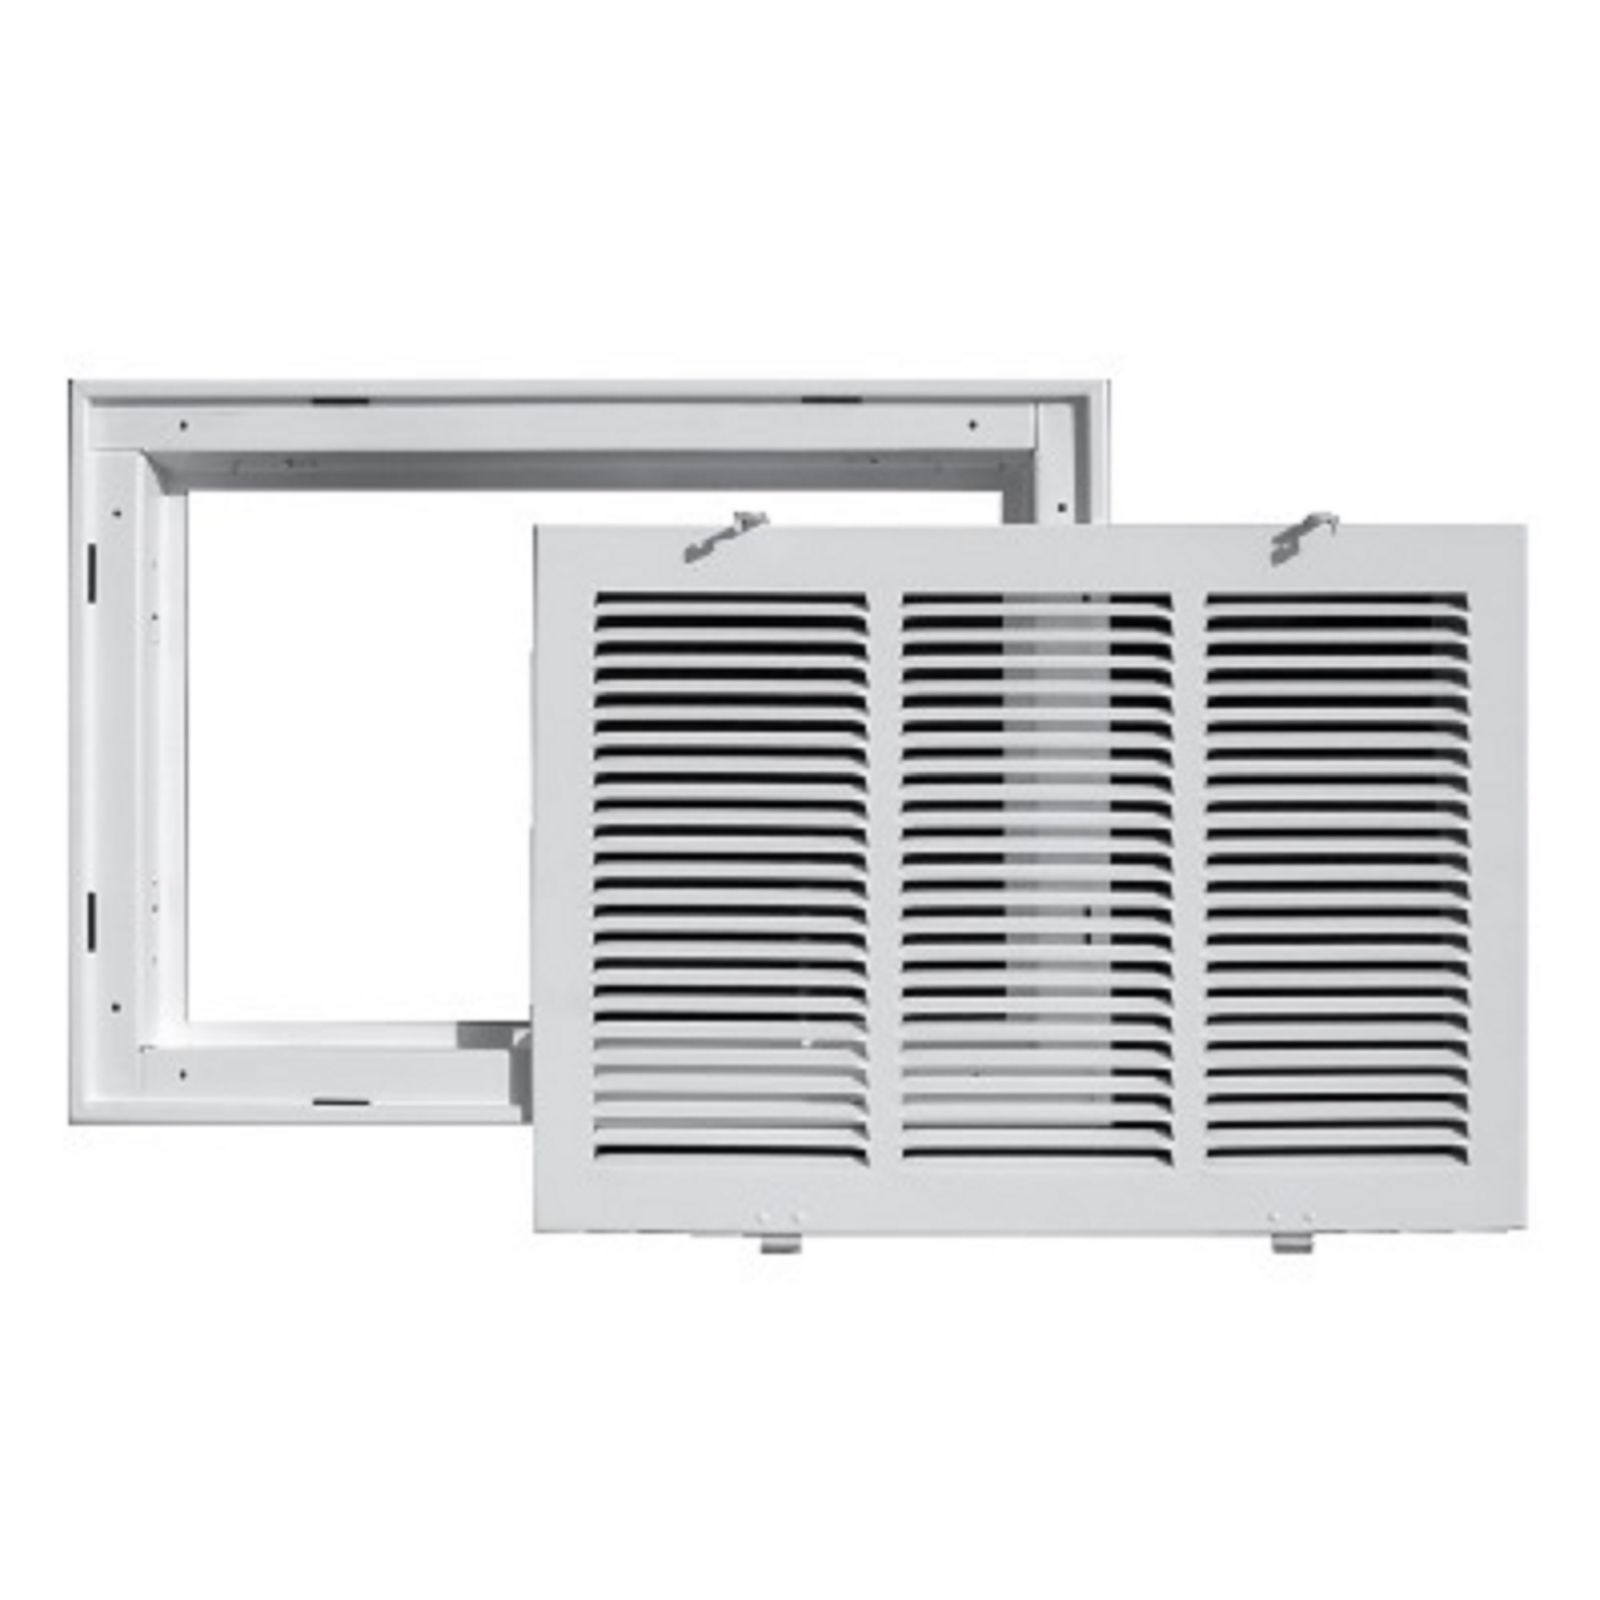 TRUaire 190RF 30X10 - Steel Return Air Filter Grille With Removable Face, White, 30" X 10"